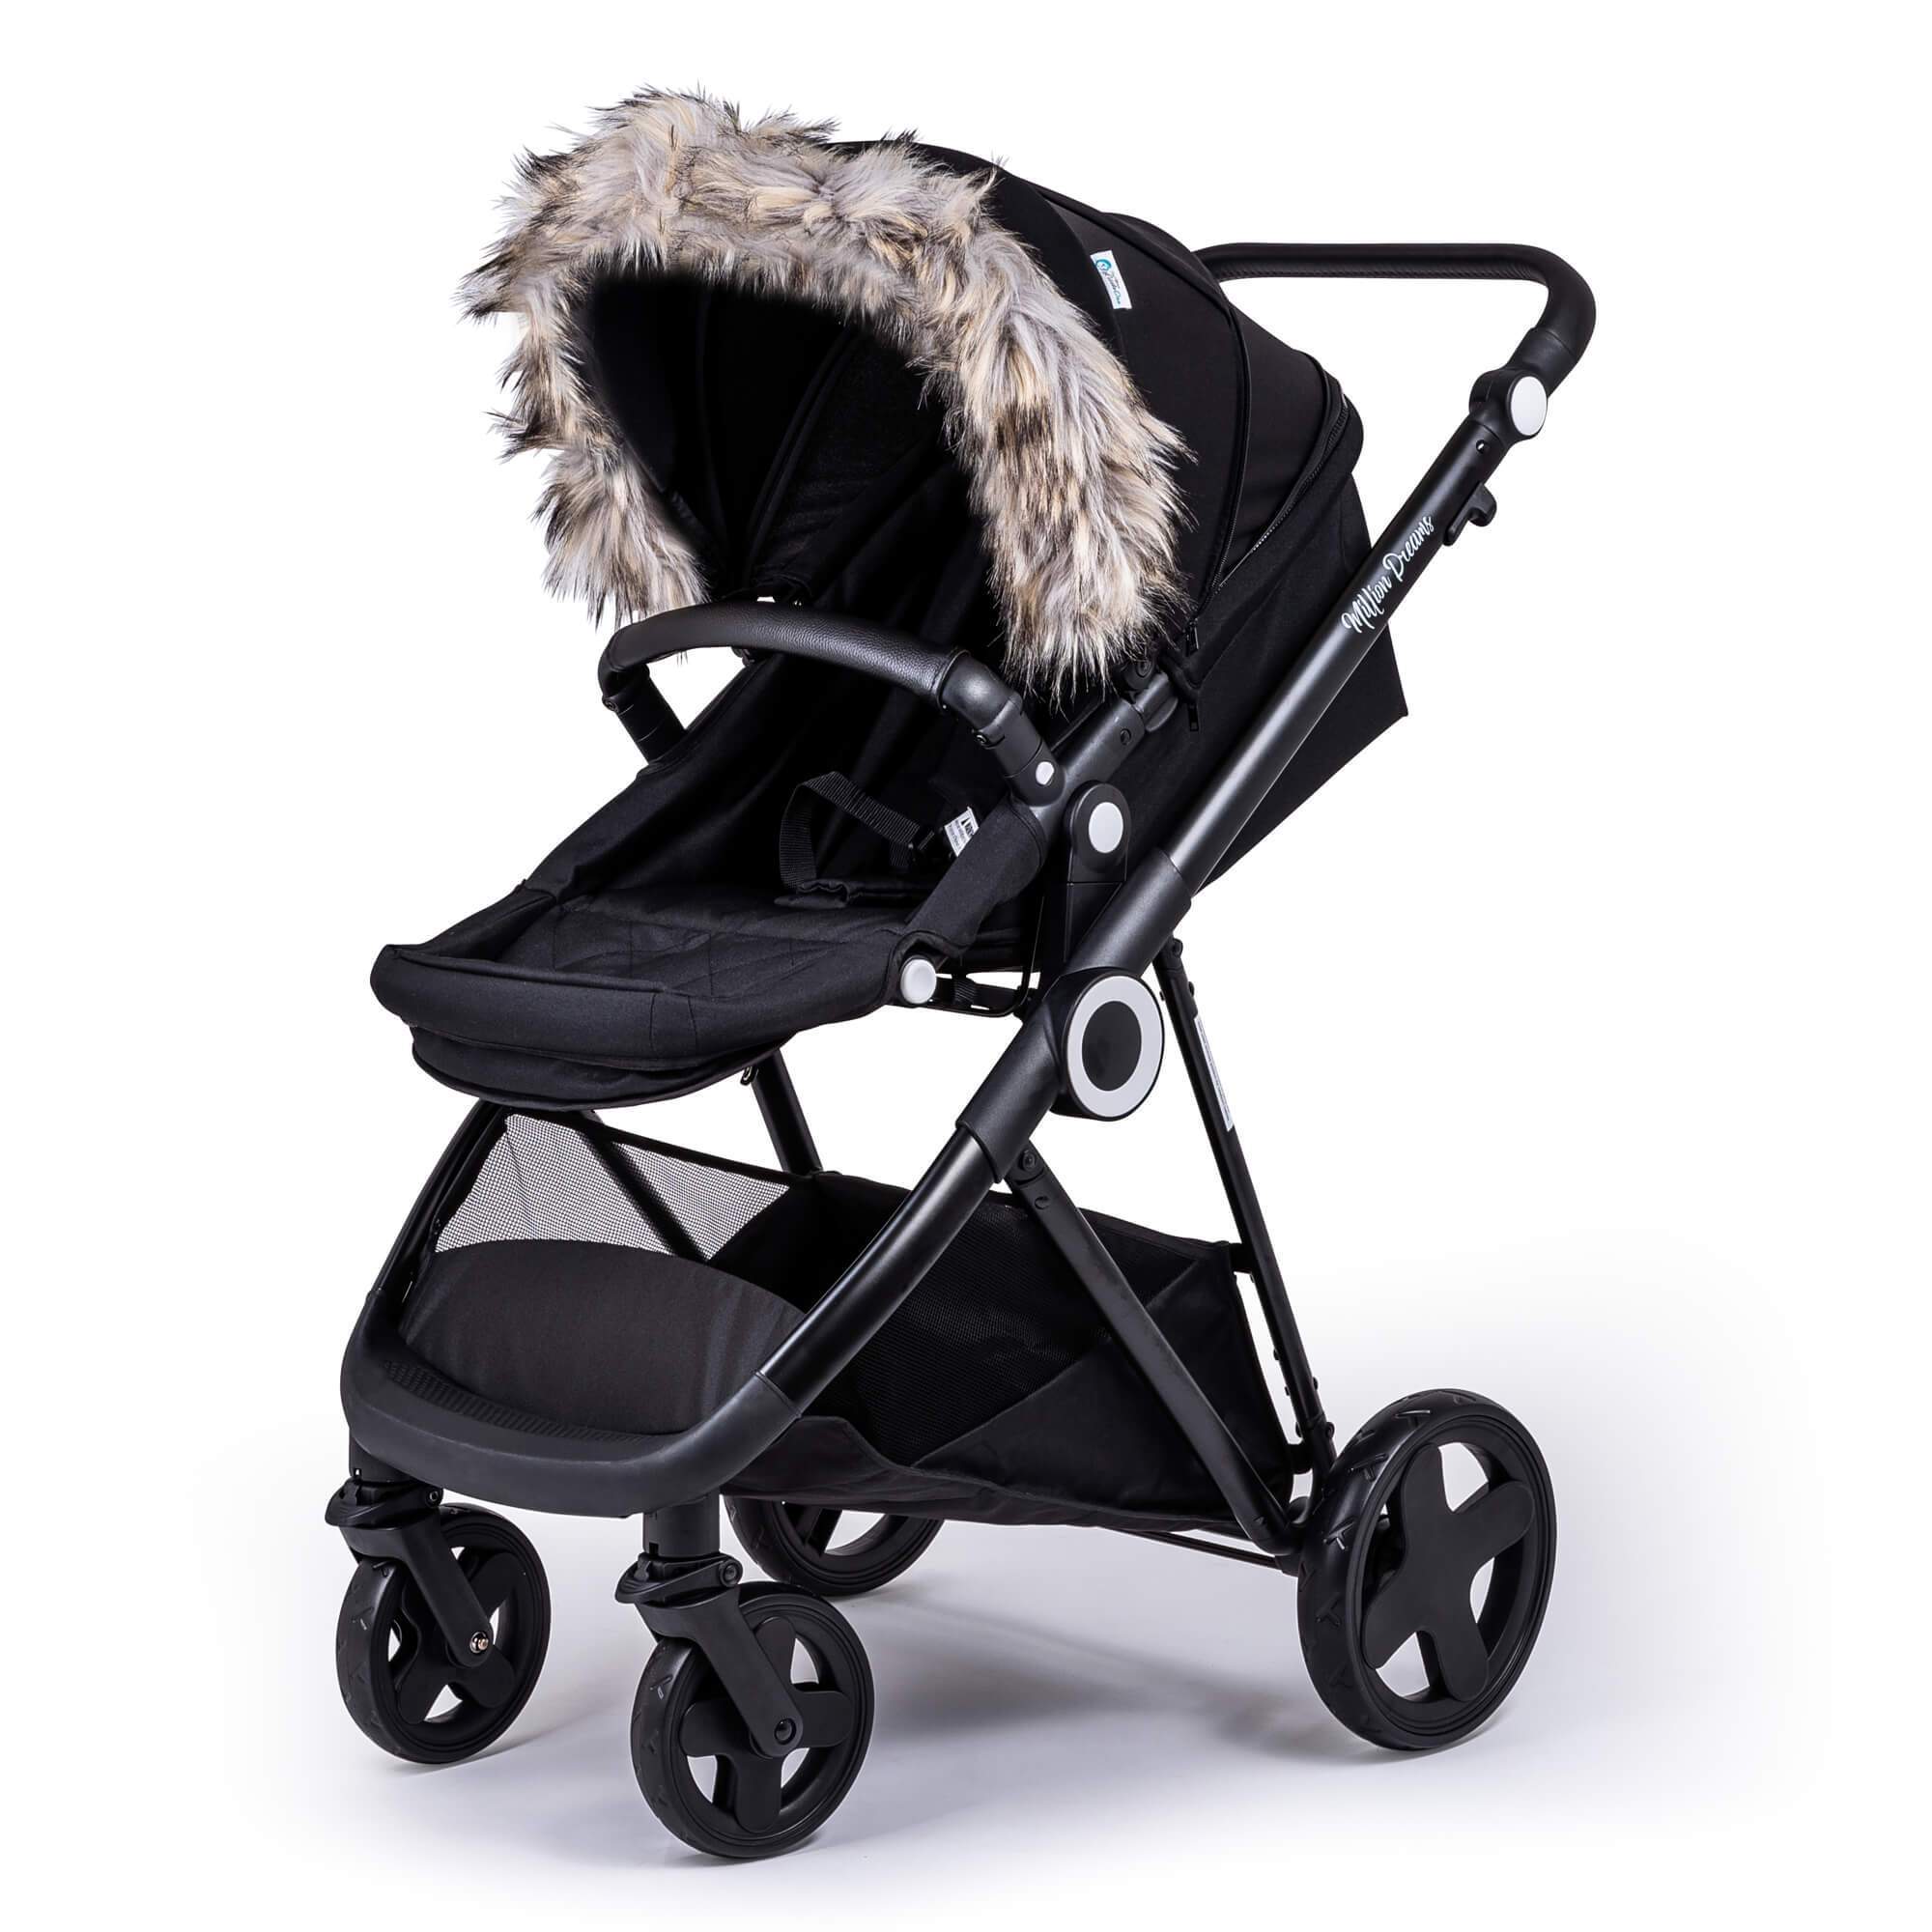 Pram Fur Hood Trim Attachment for Pushchair Compatible with iCandy - Light Grey / Fits All Models | For Your Little One